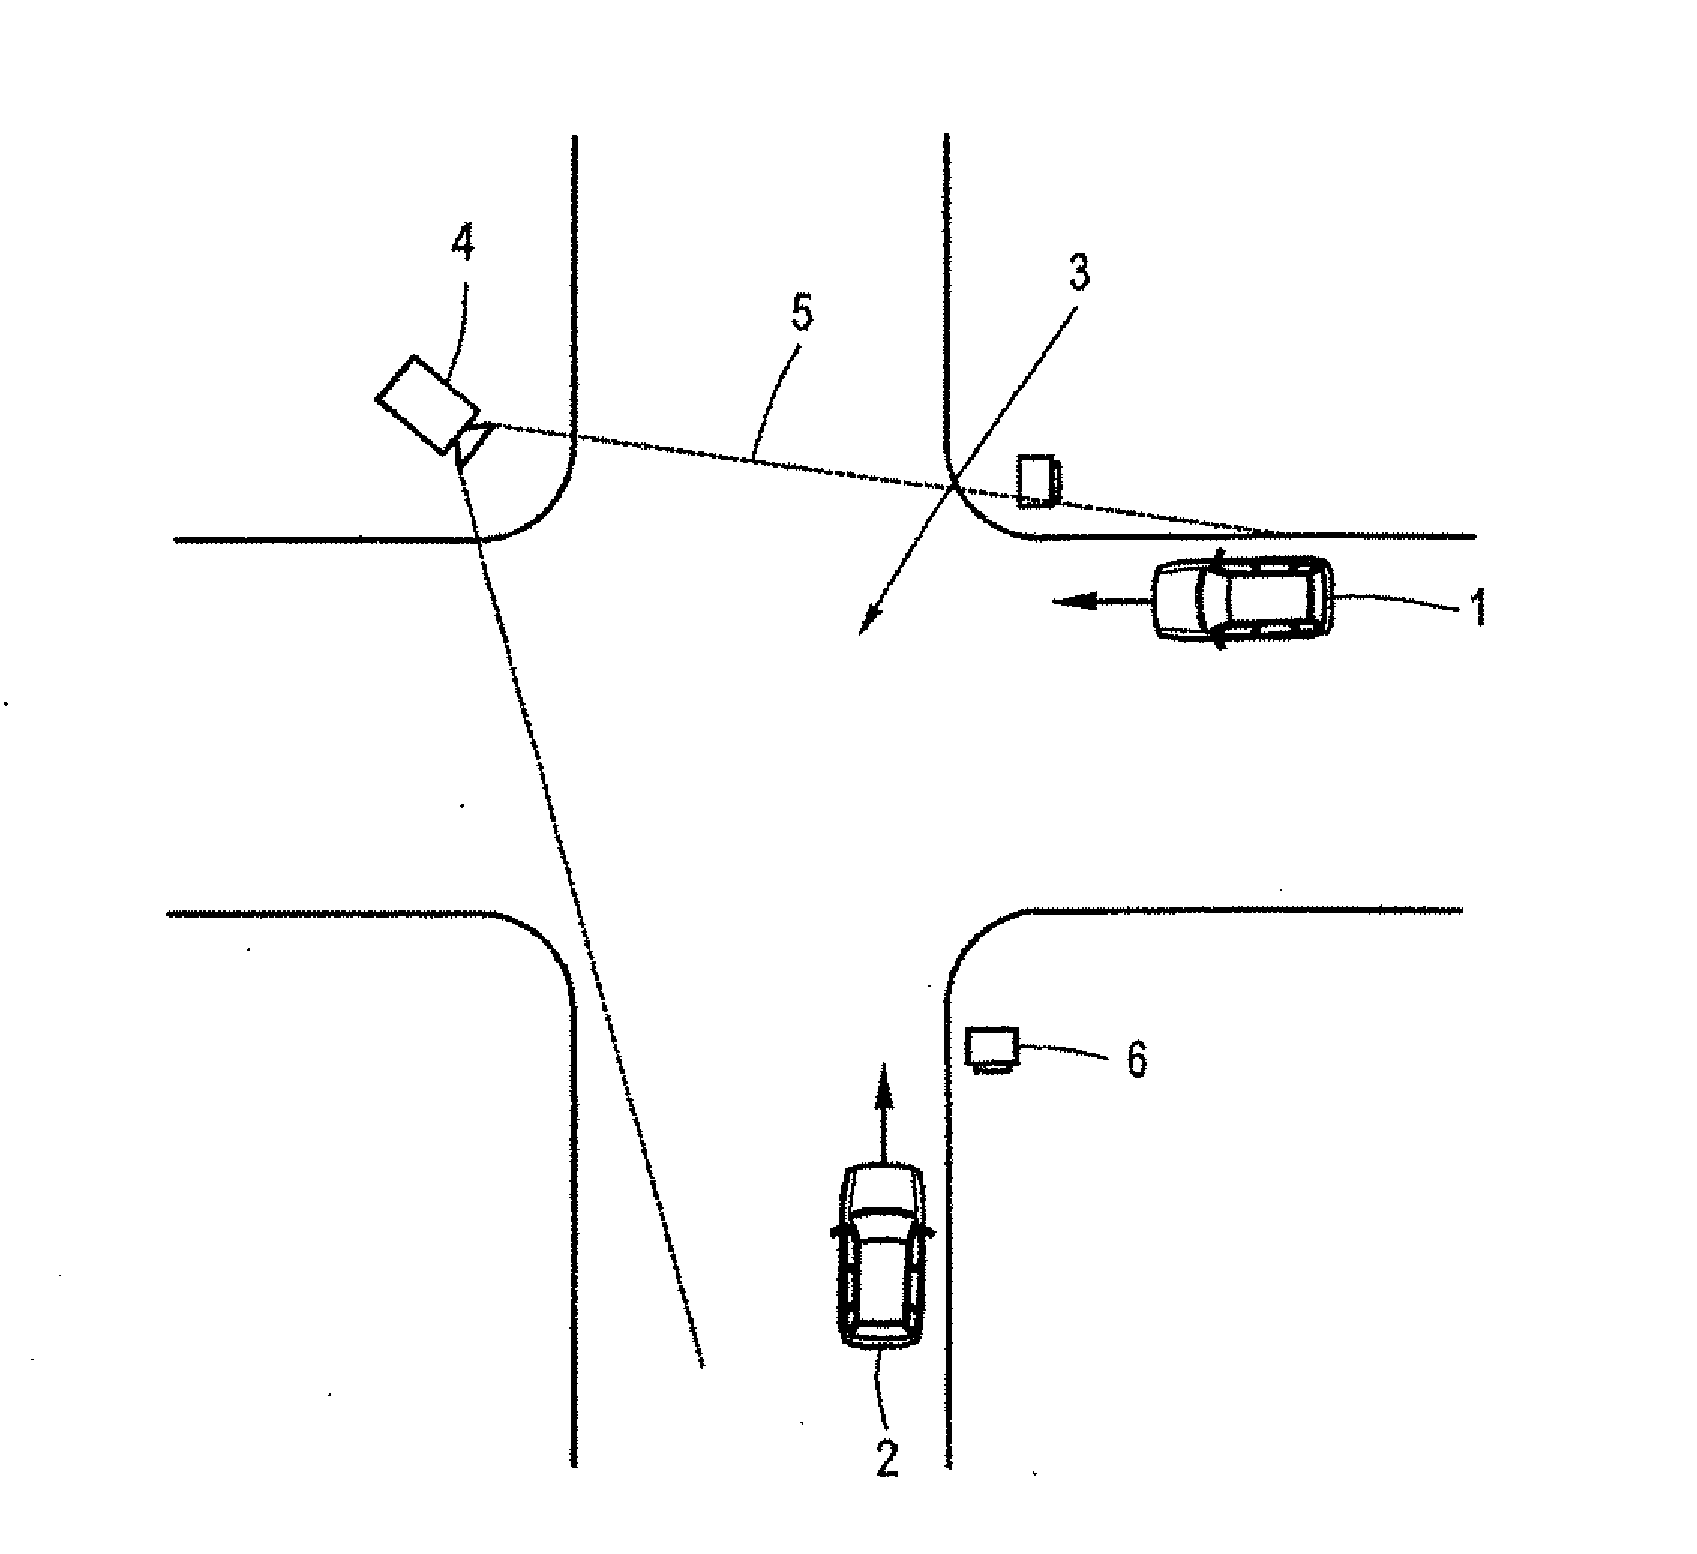 Method for coordinating the operation of motor vehicles